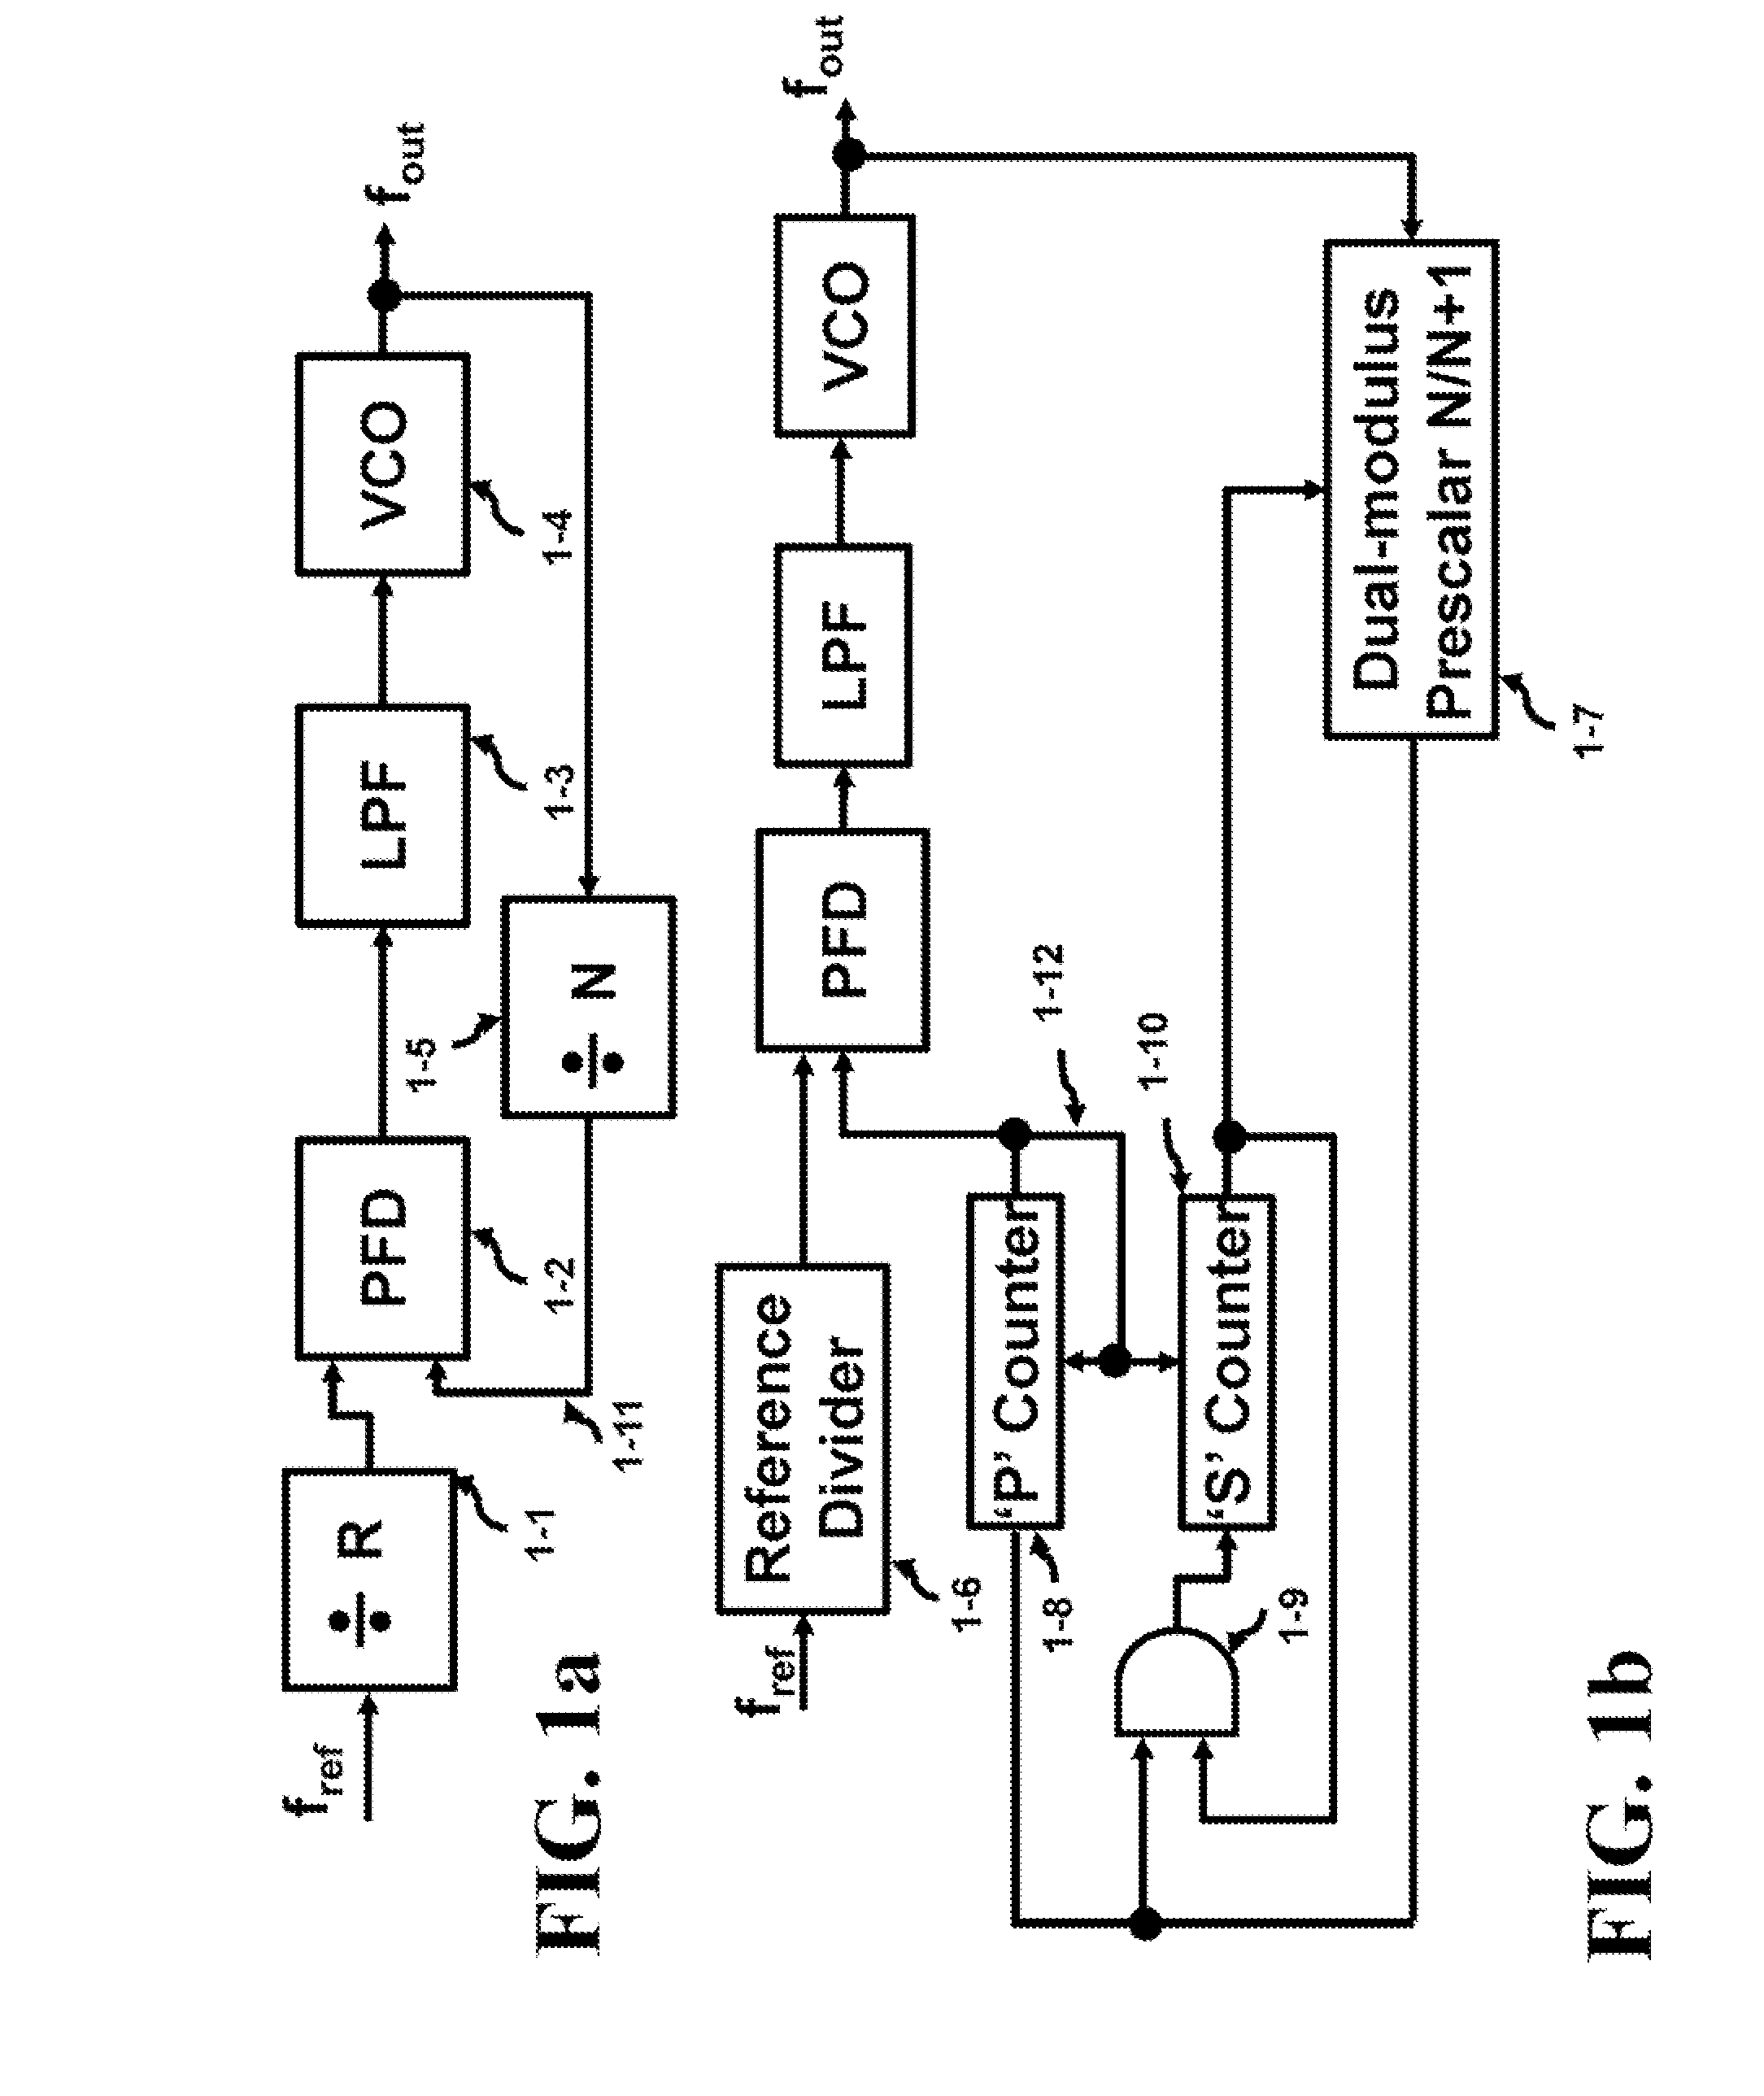 High Performance Divider Using Feed Forward, Clock Amplification and Series Peaking Inductors